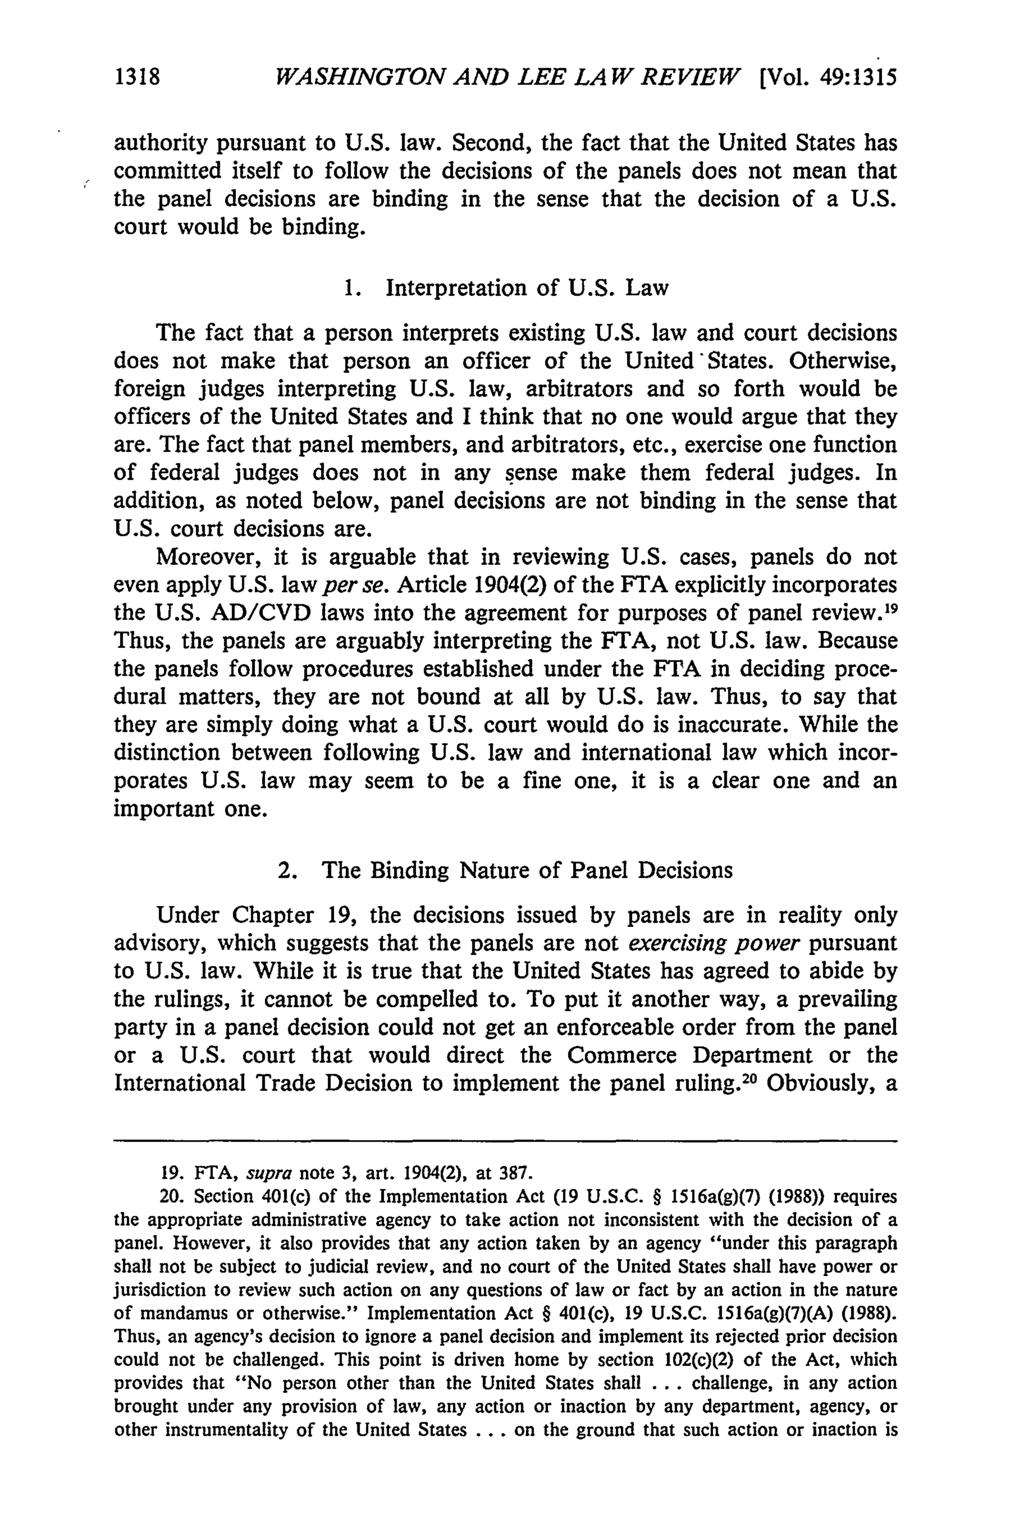 1318 WASHINGTON AND LEE LAW REVIEW [Vol. 49:1315 authority pursuant to U.S. law.